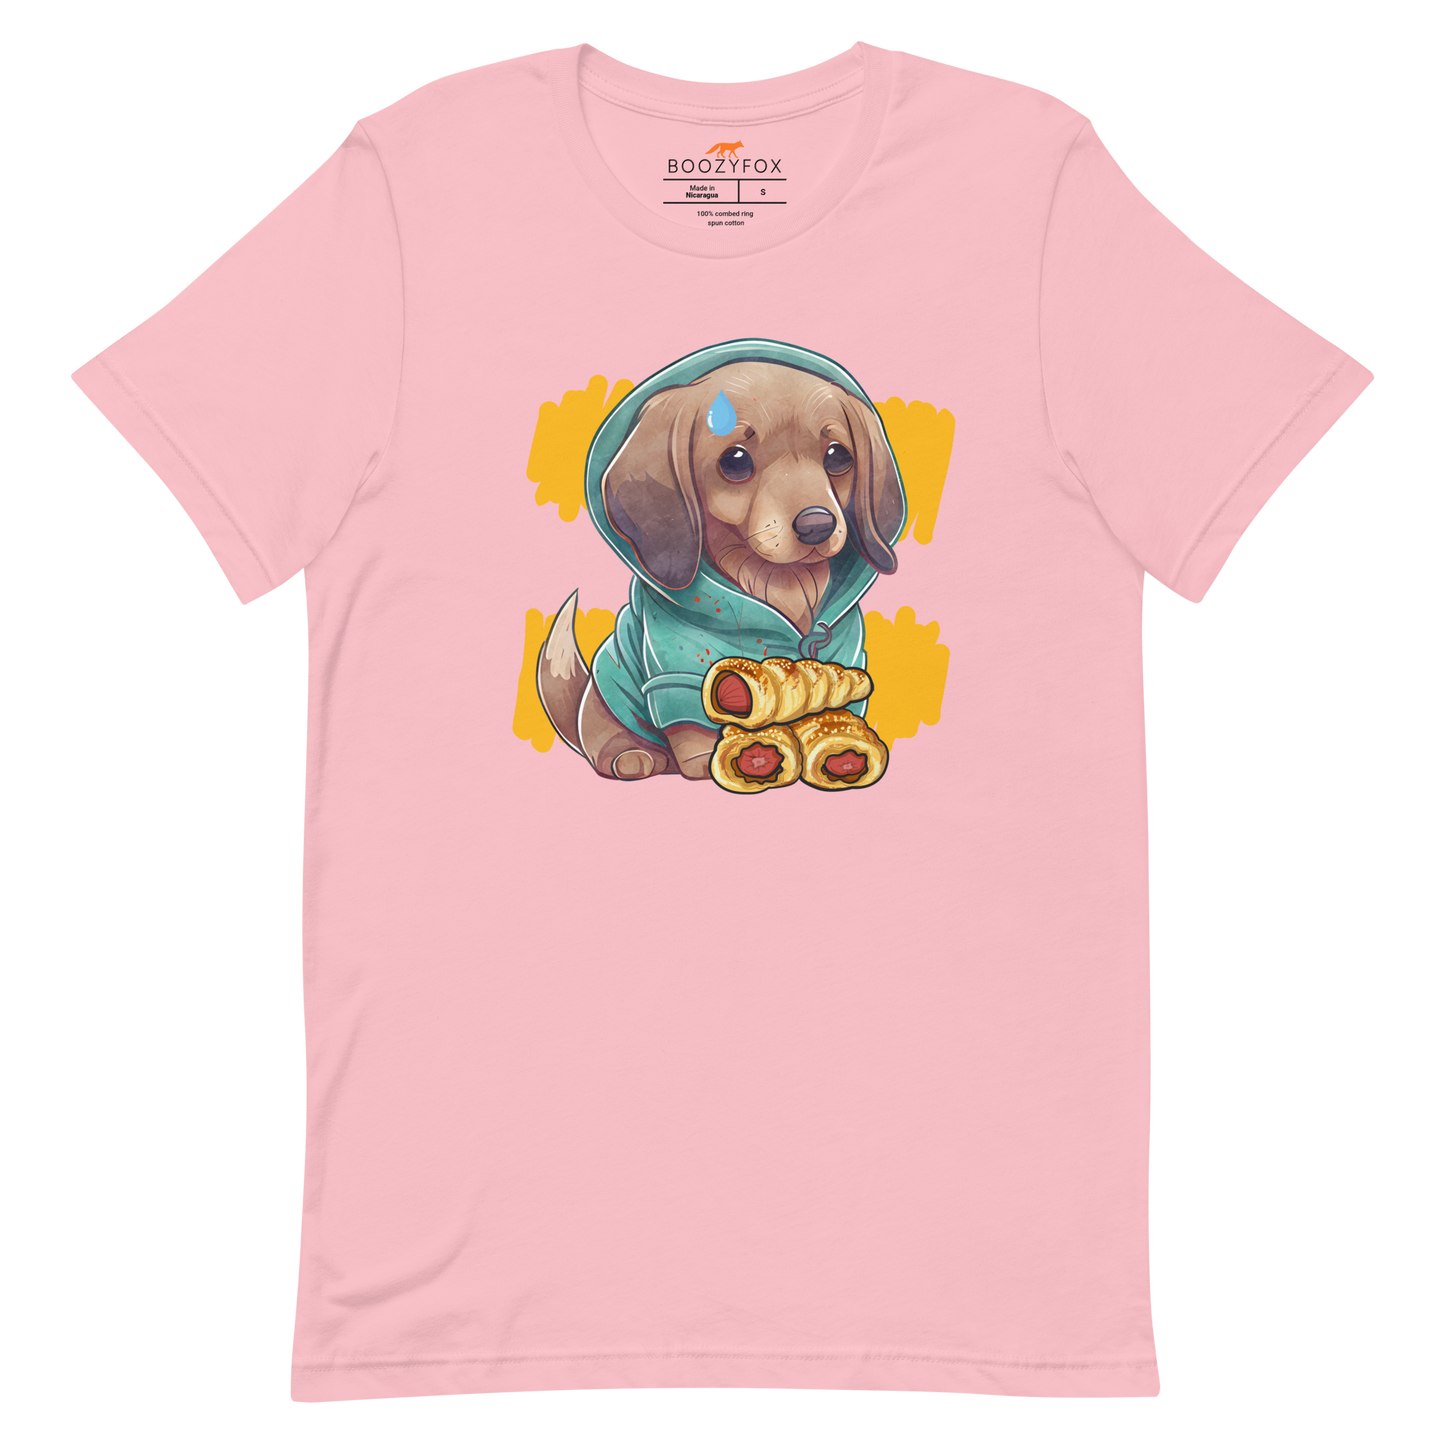 Pink Premium Sausage Dog T-Shirt featuring an adorable sausage roll dachshund graphic on the chest - Cute Graphic Dachshund  Tees - Boozy Fox